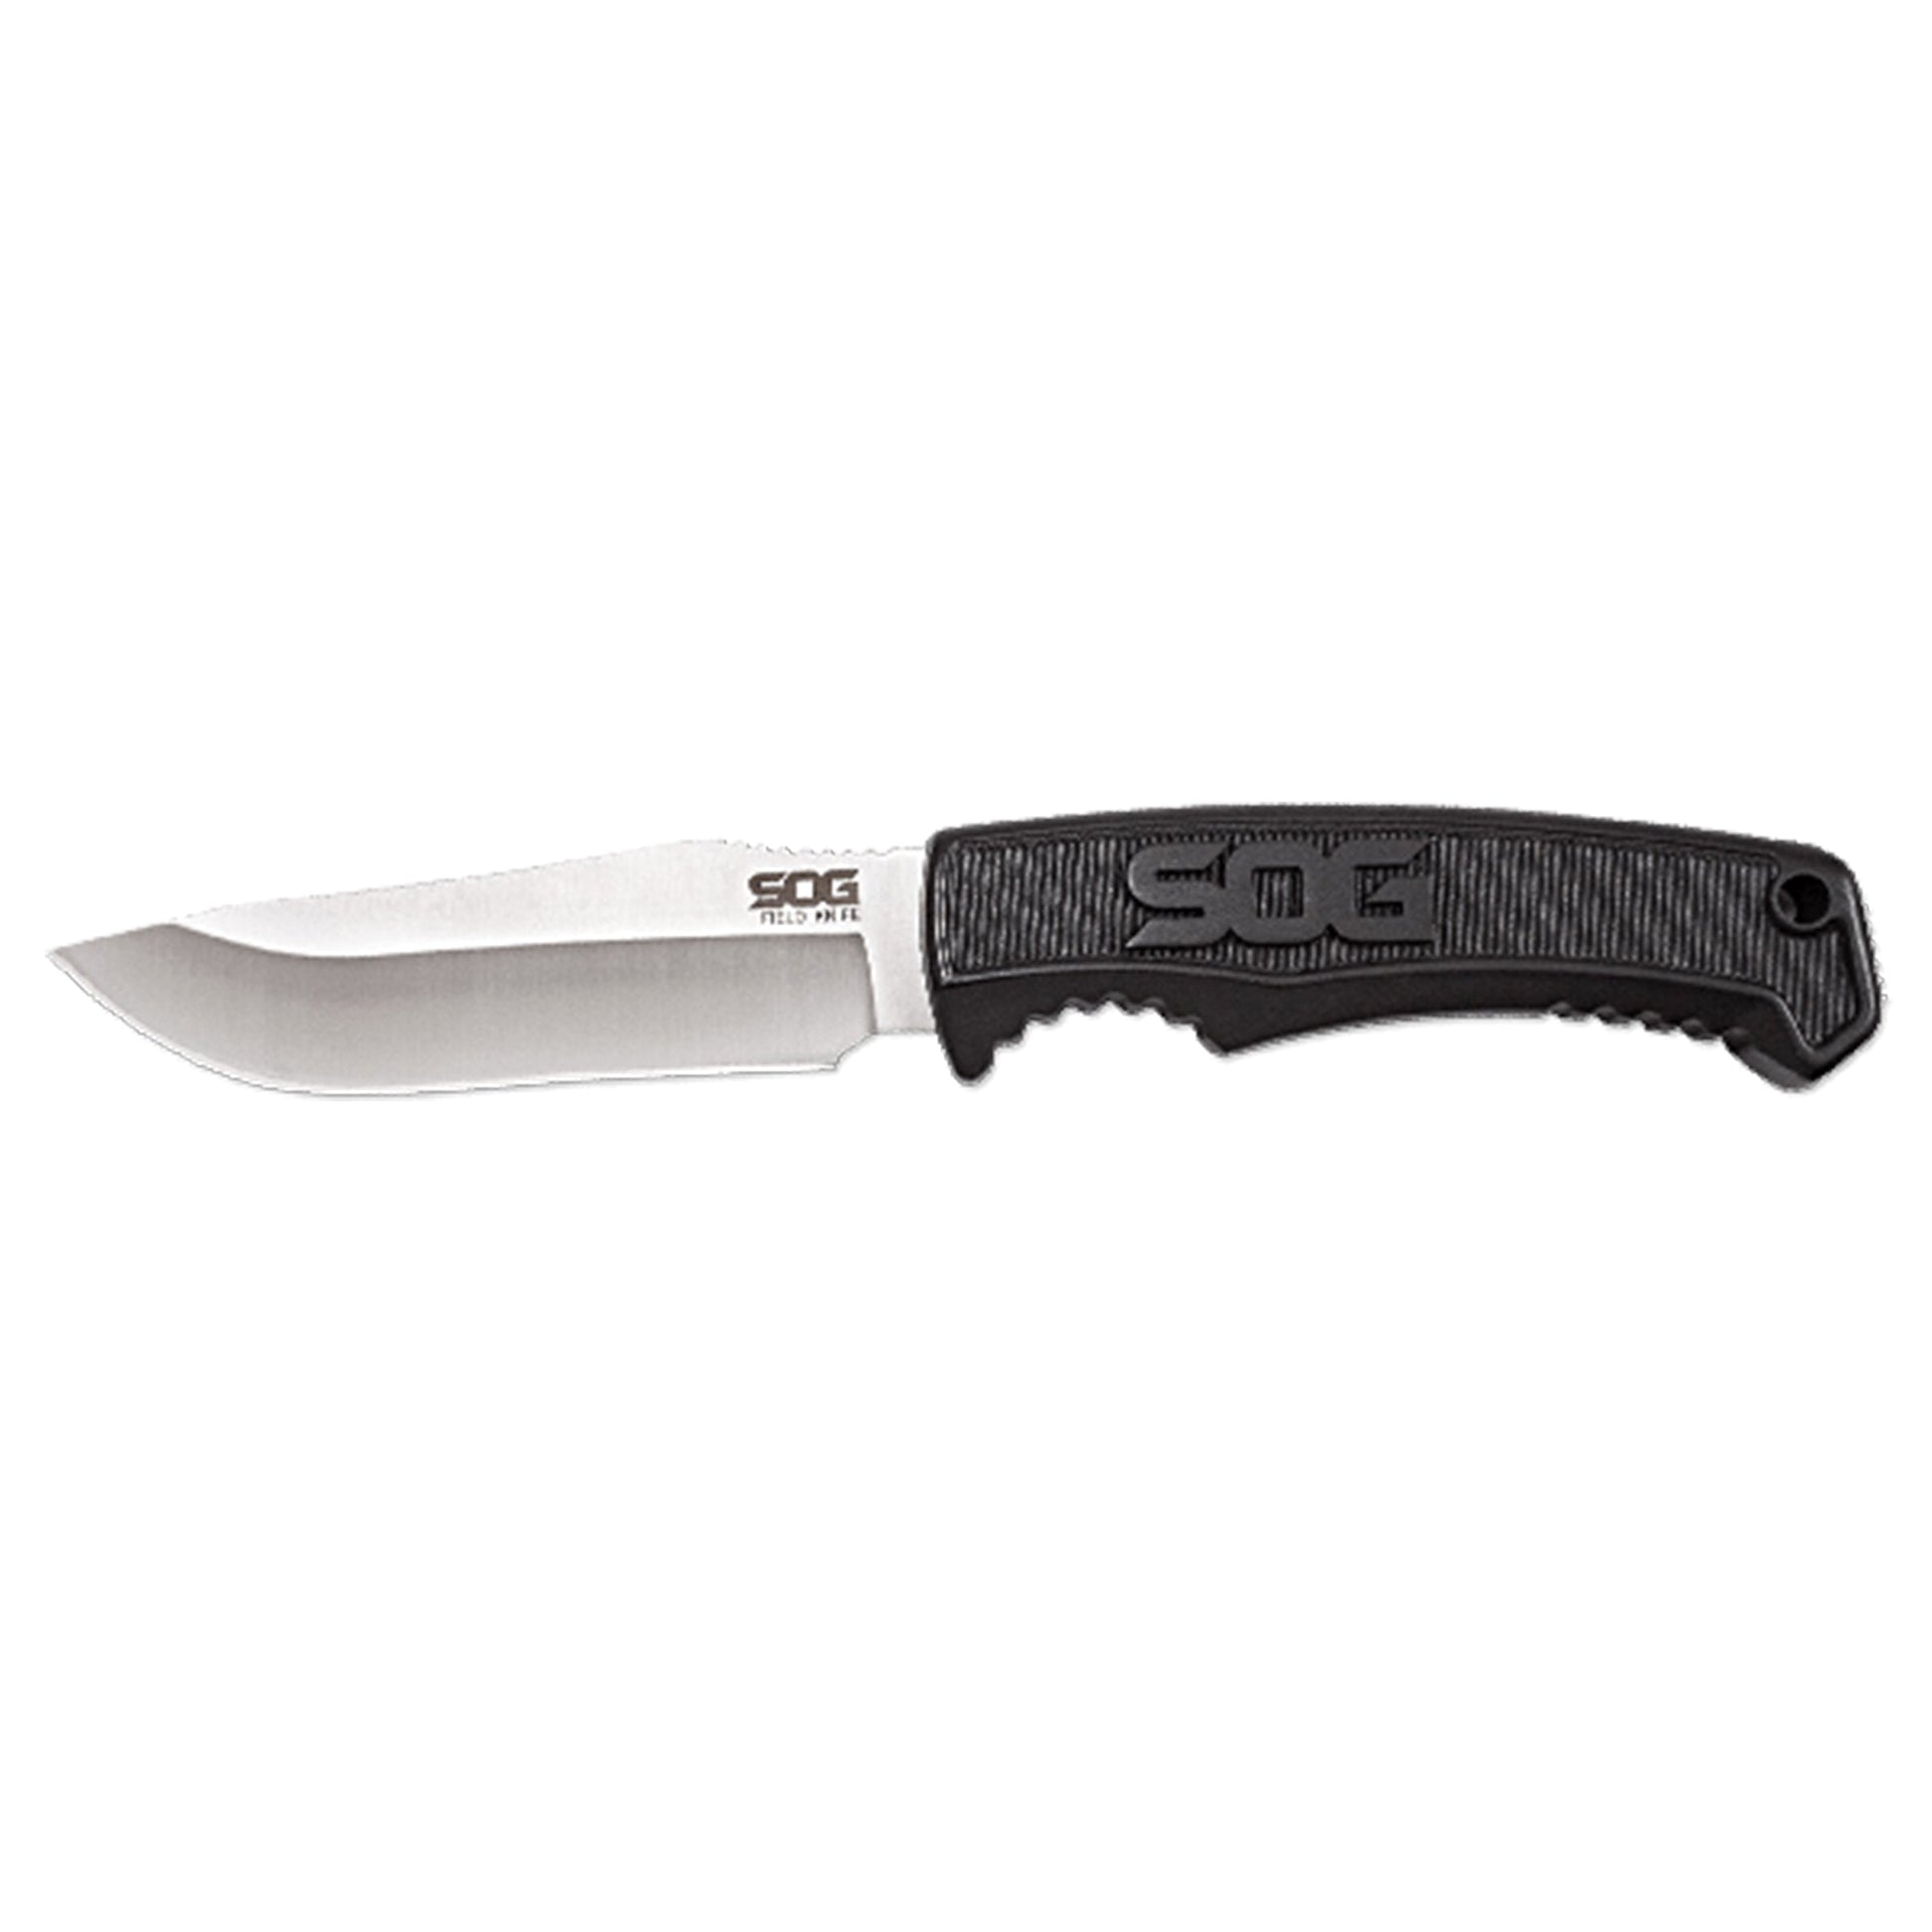 Field Knife Big Adventure Outfitters